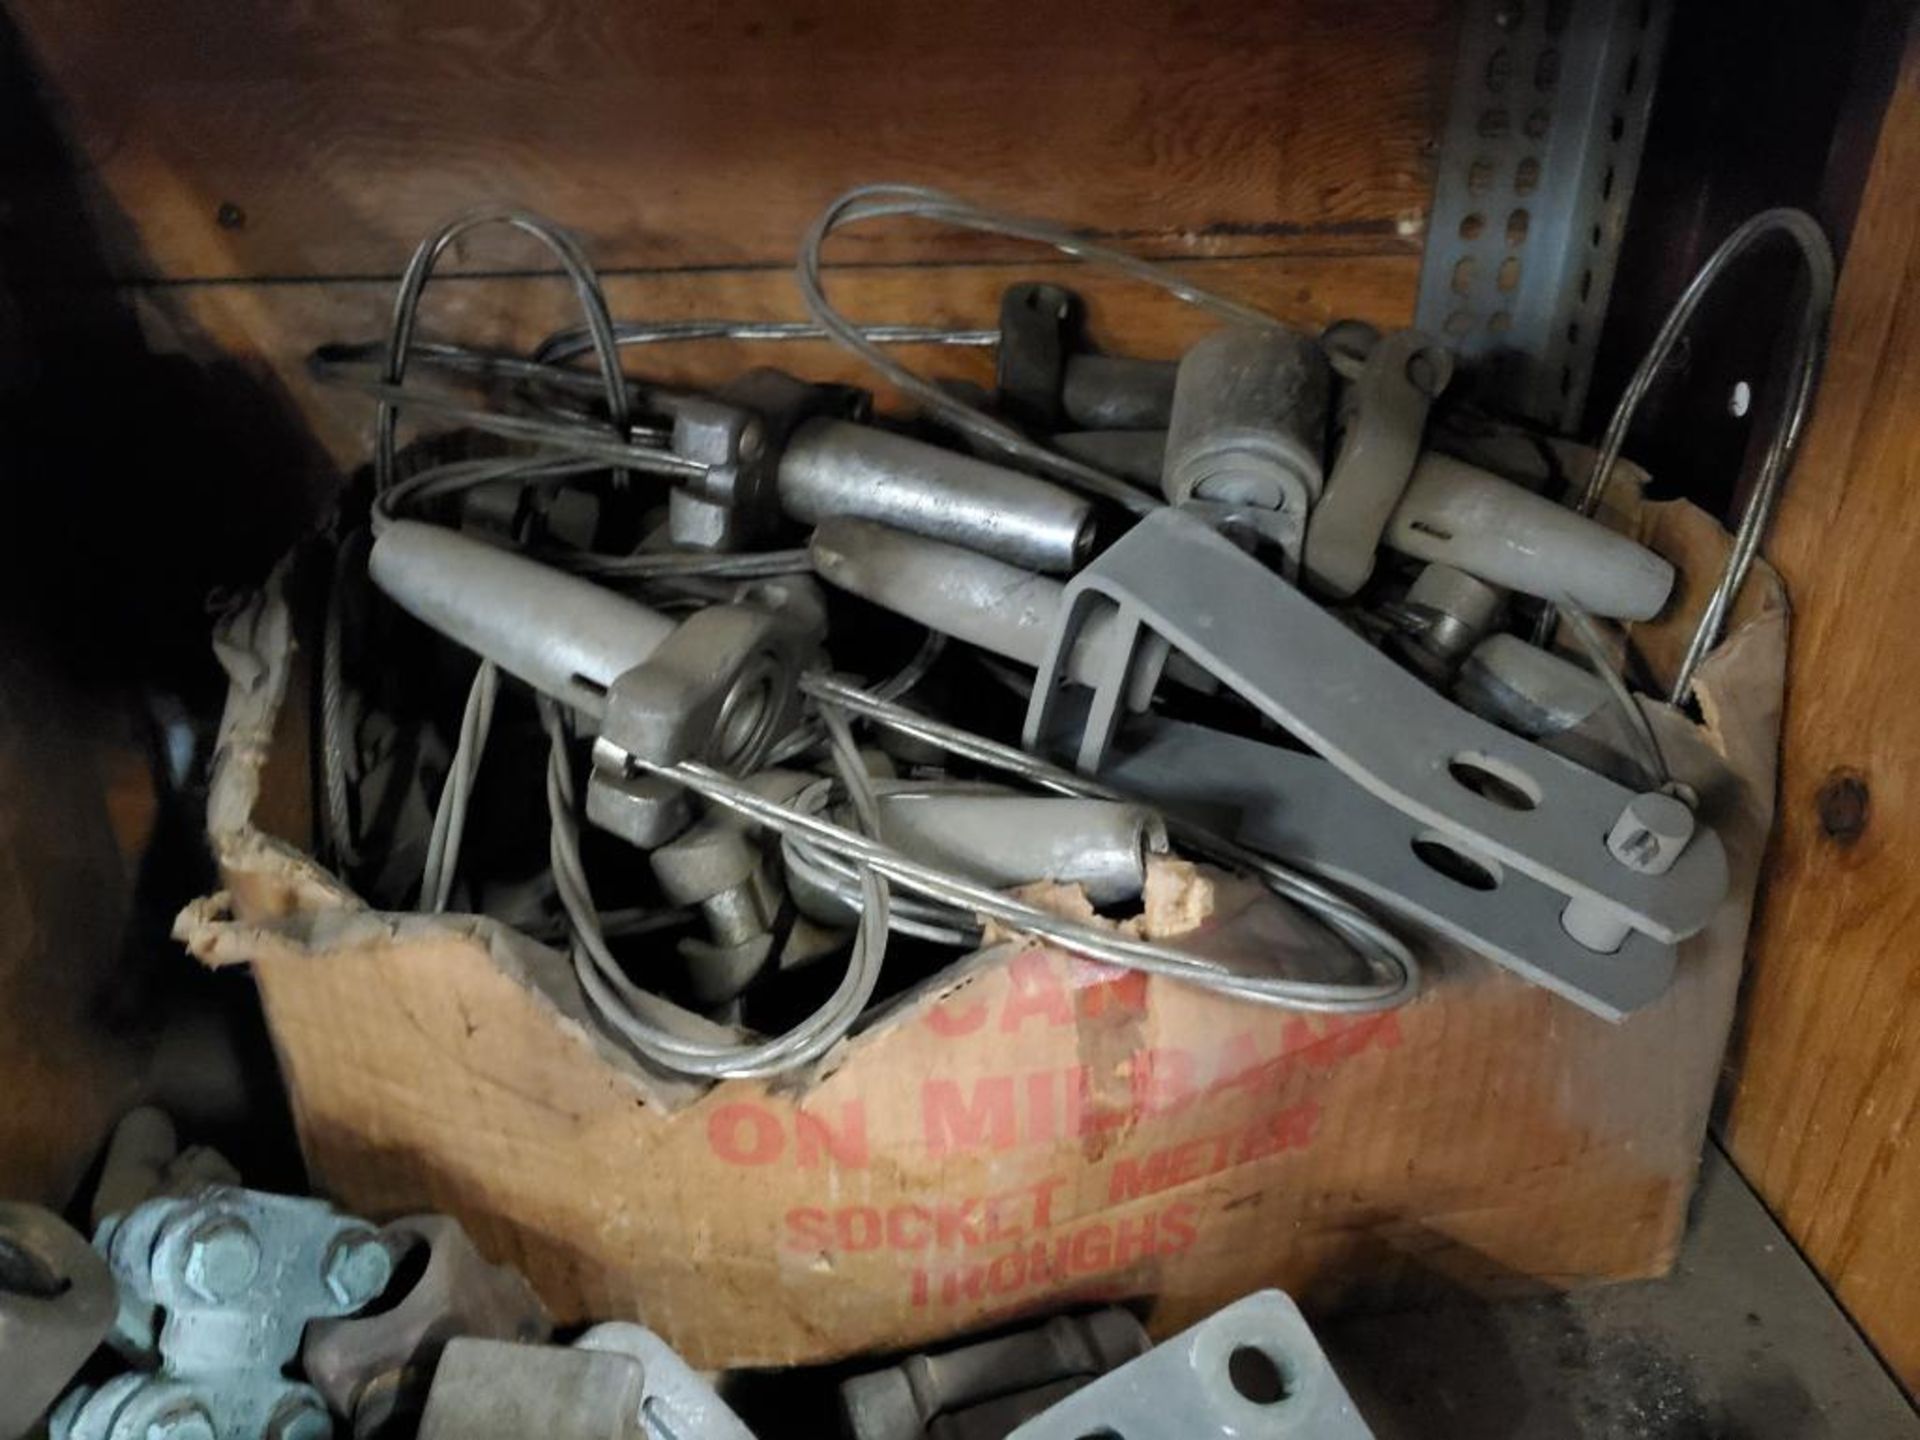 Contents of one shelf cubby - Large assortment of electrical lugs, fittings, and connectors. - Image 6 of 8